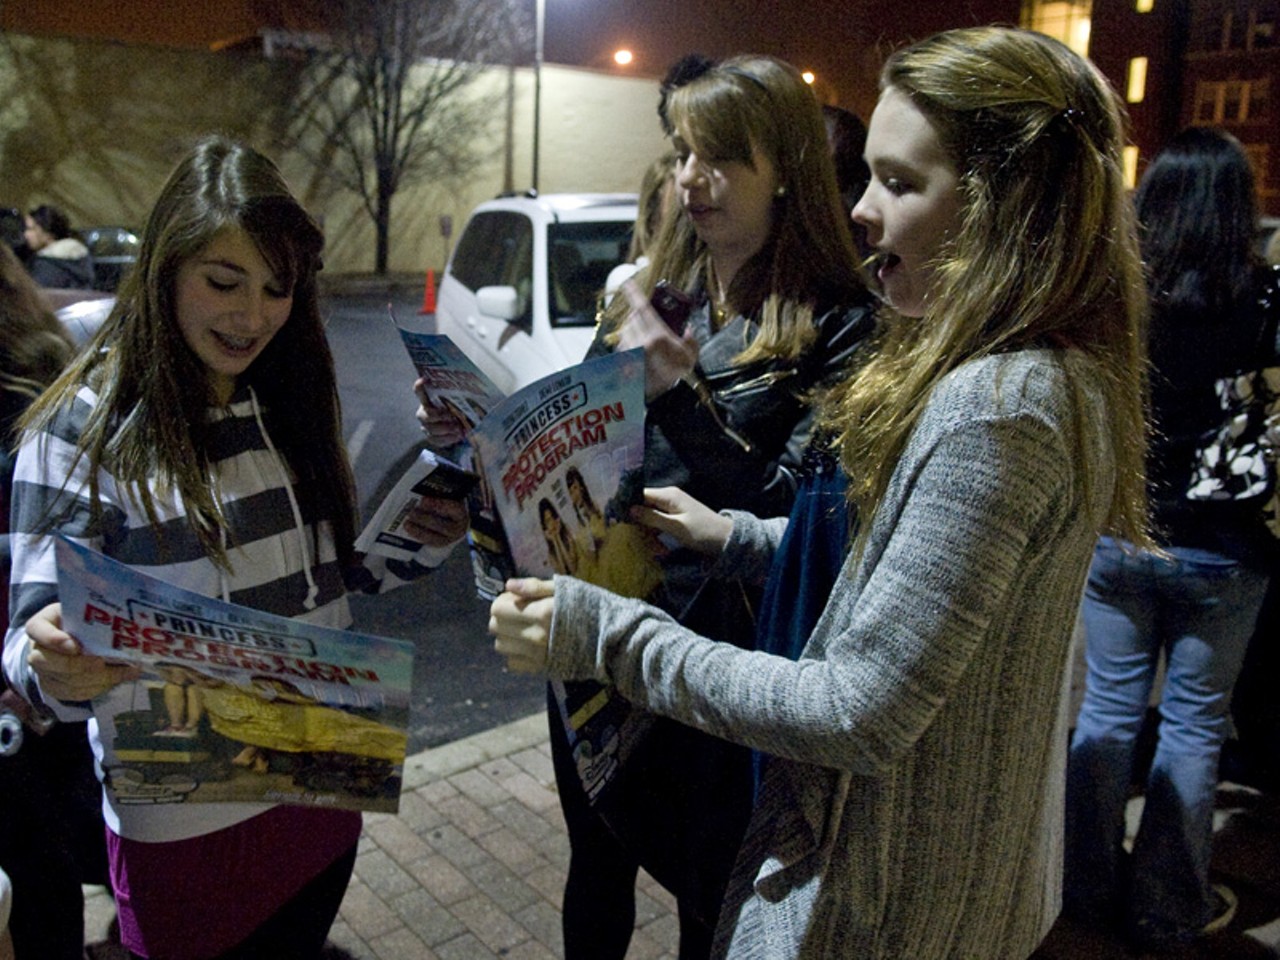 Fans hold posters for Princess Protection Program, a 2009 movie by Disney, which also supports Nick Jonas.